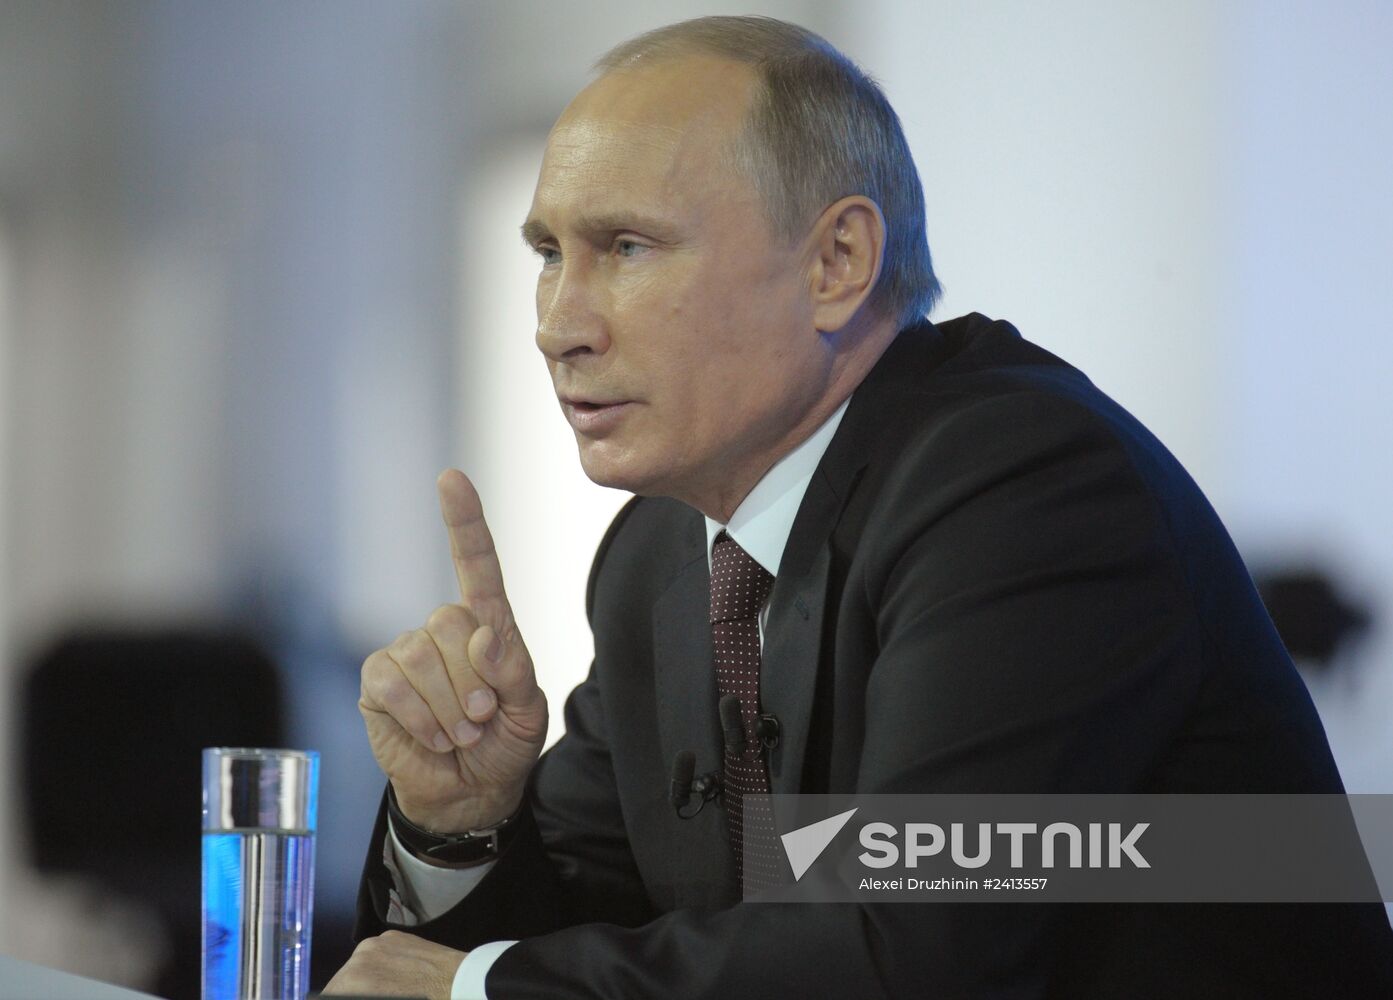 Vladimir Putin holds question and answer session